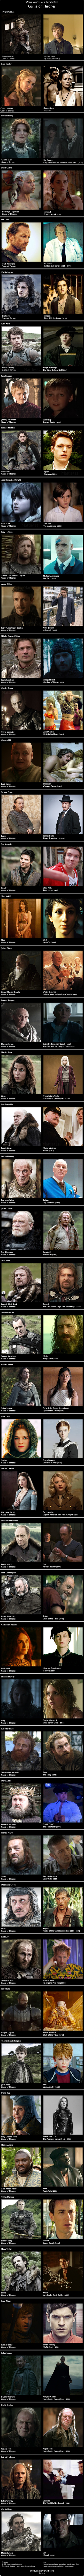 Game of Thrones Infographie